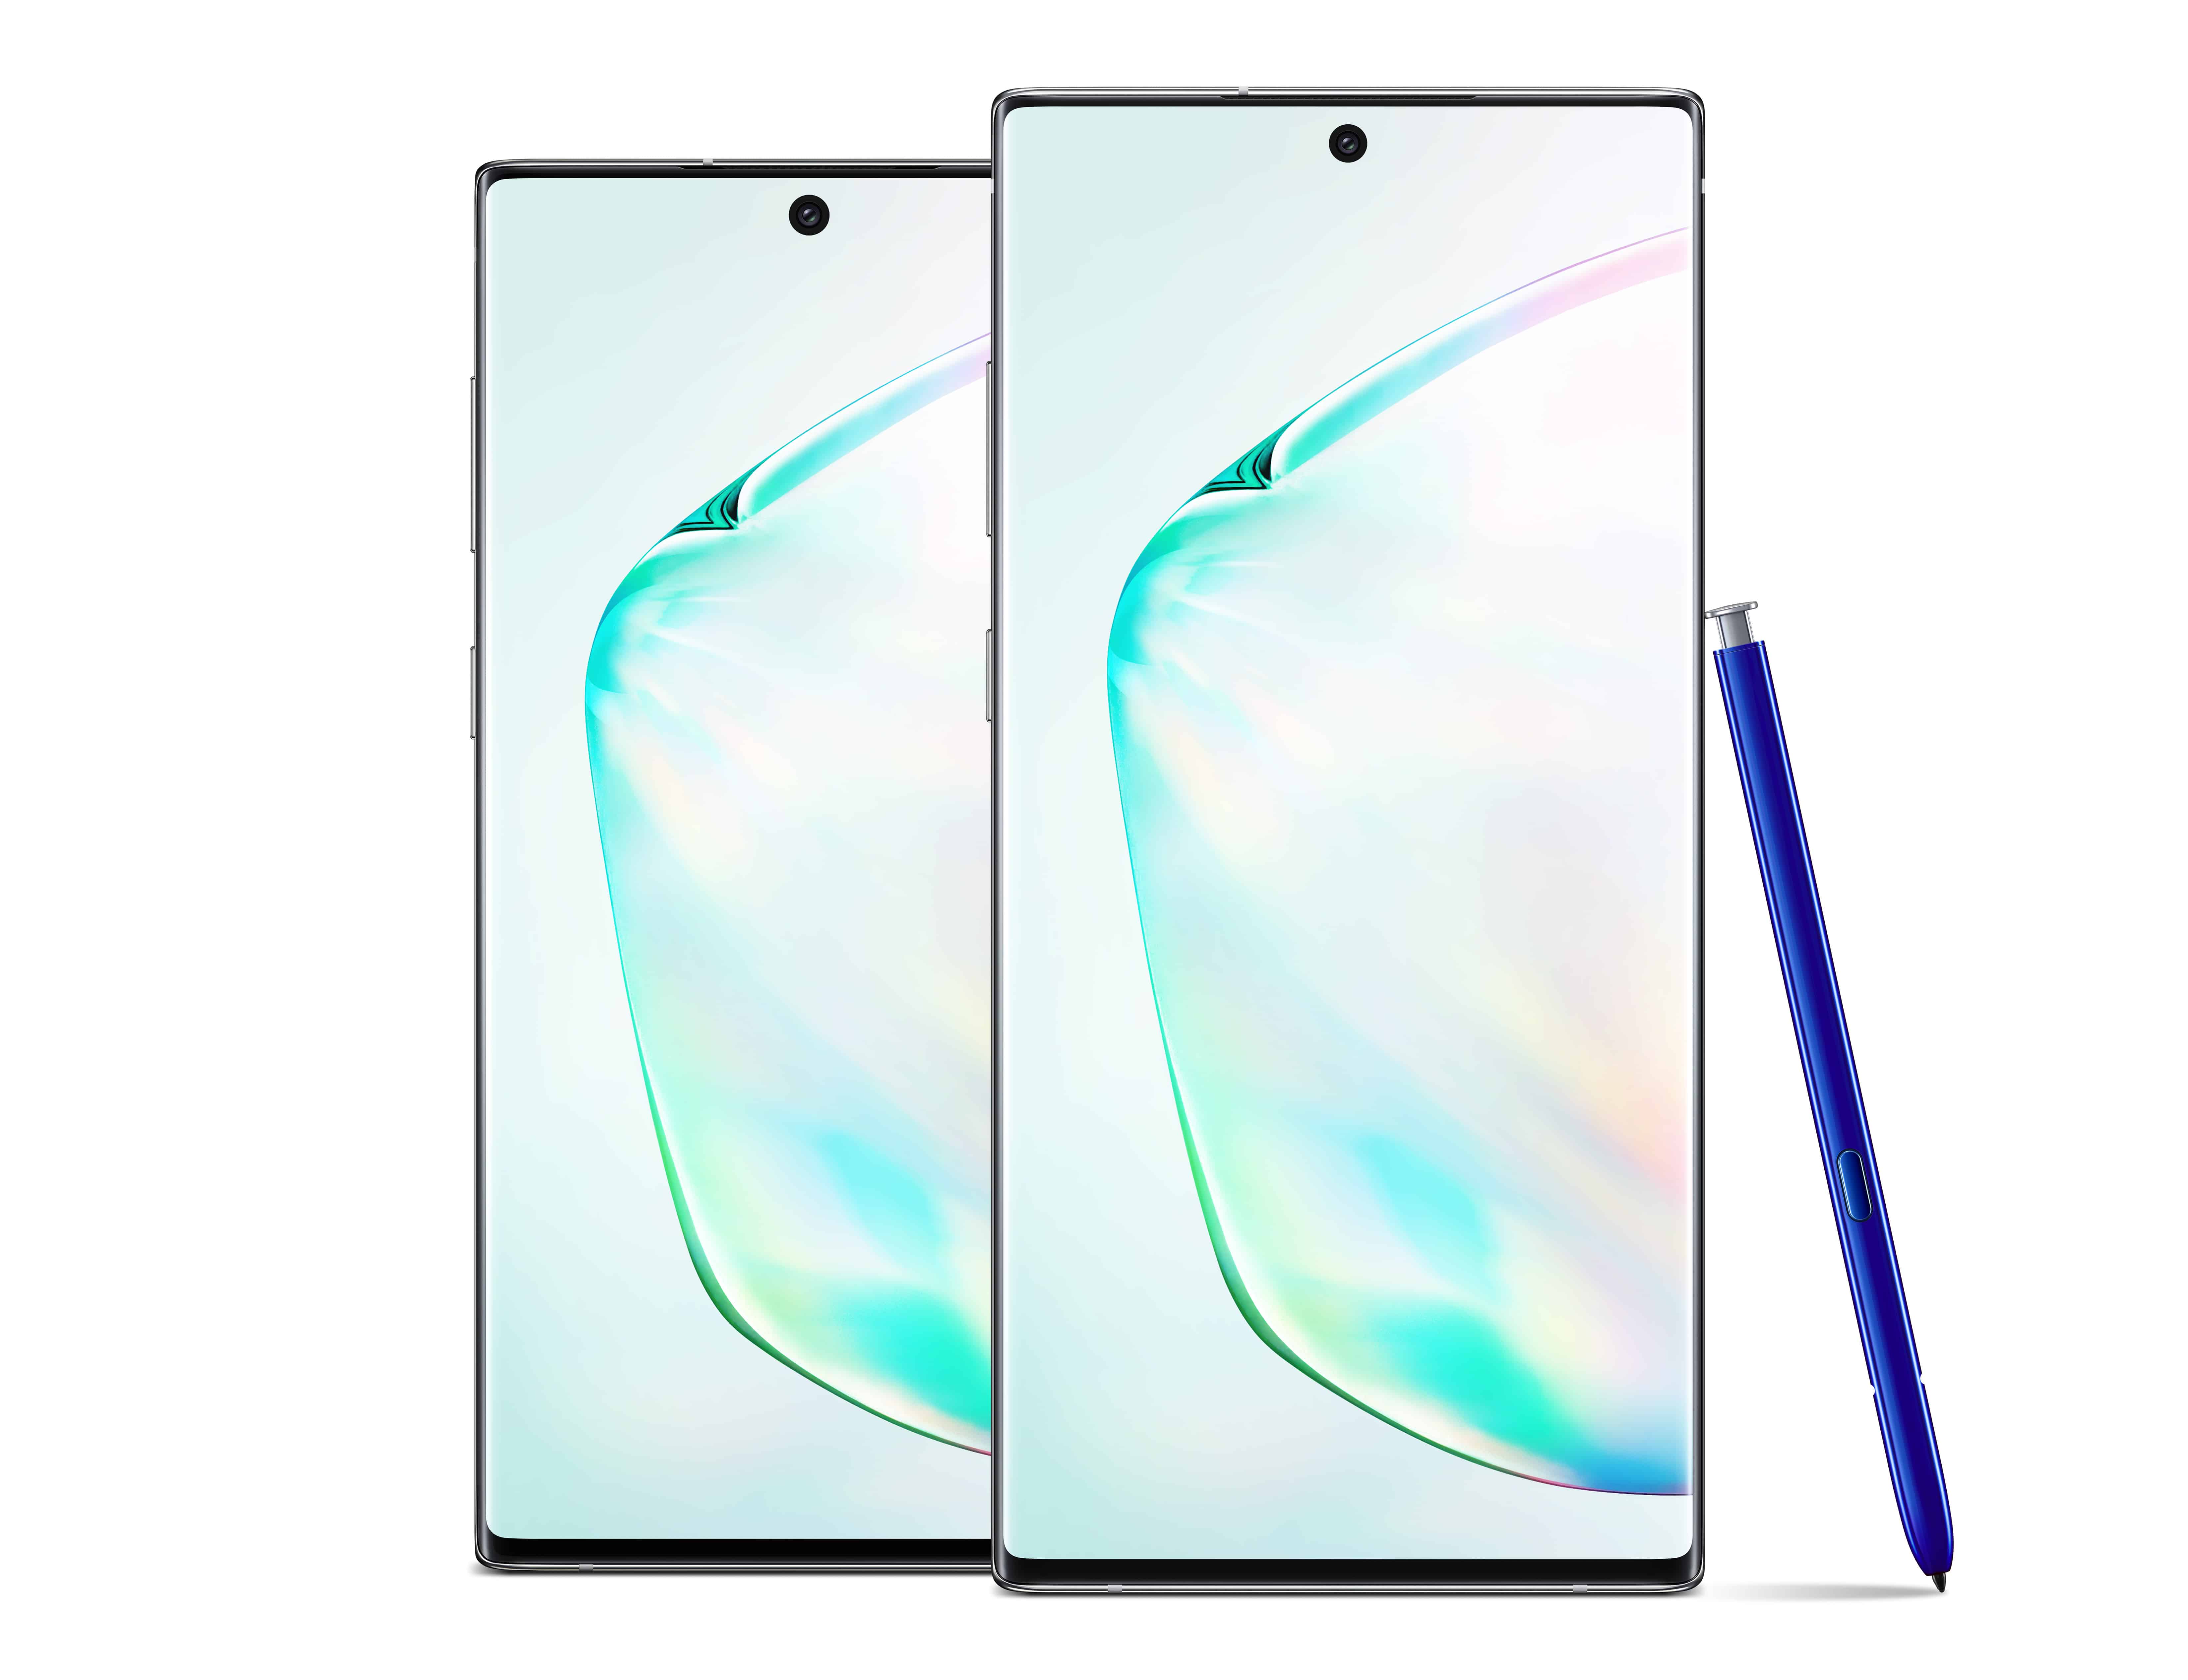 Why the new Galaxy Note 10 is at a crossroads?